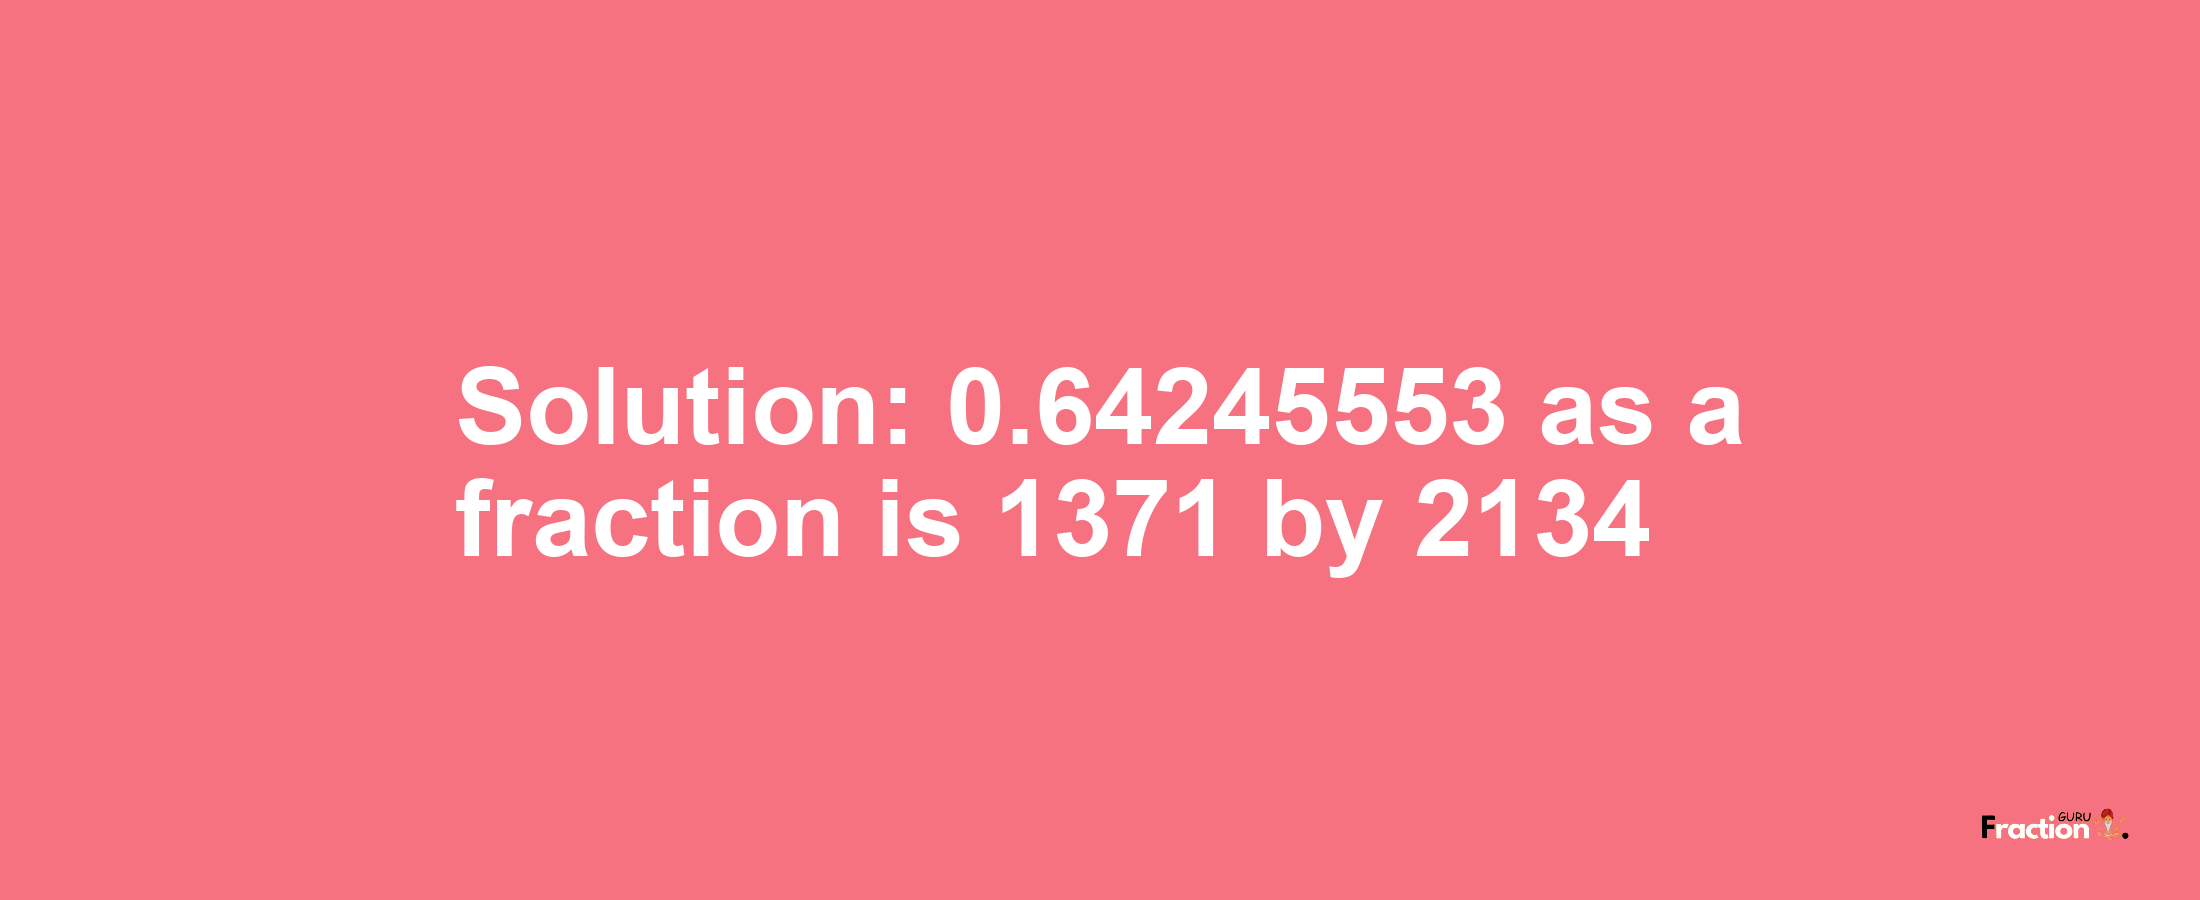 Solution:0.64245553 as a fraction is 1371/2134